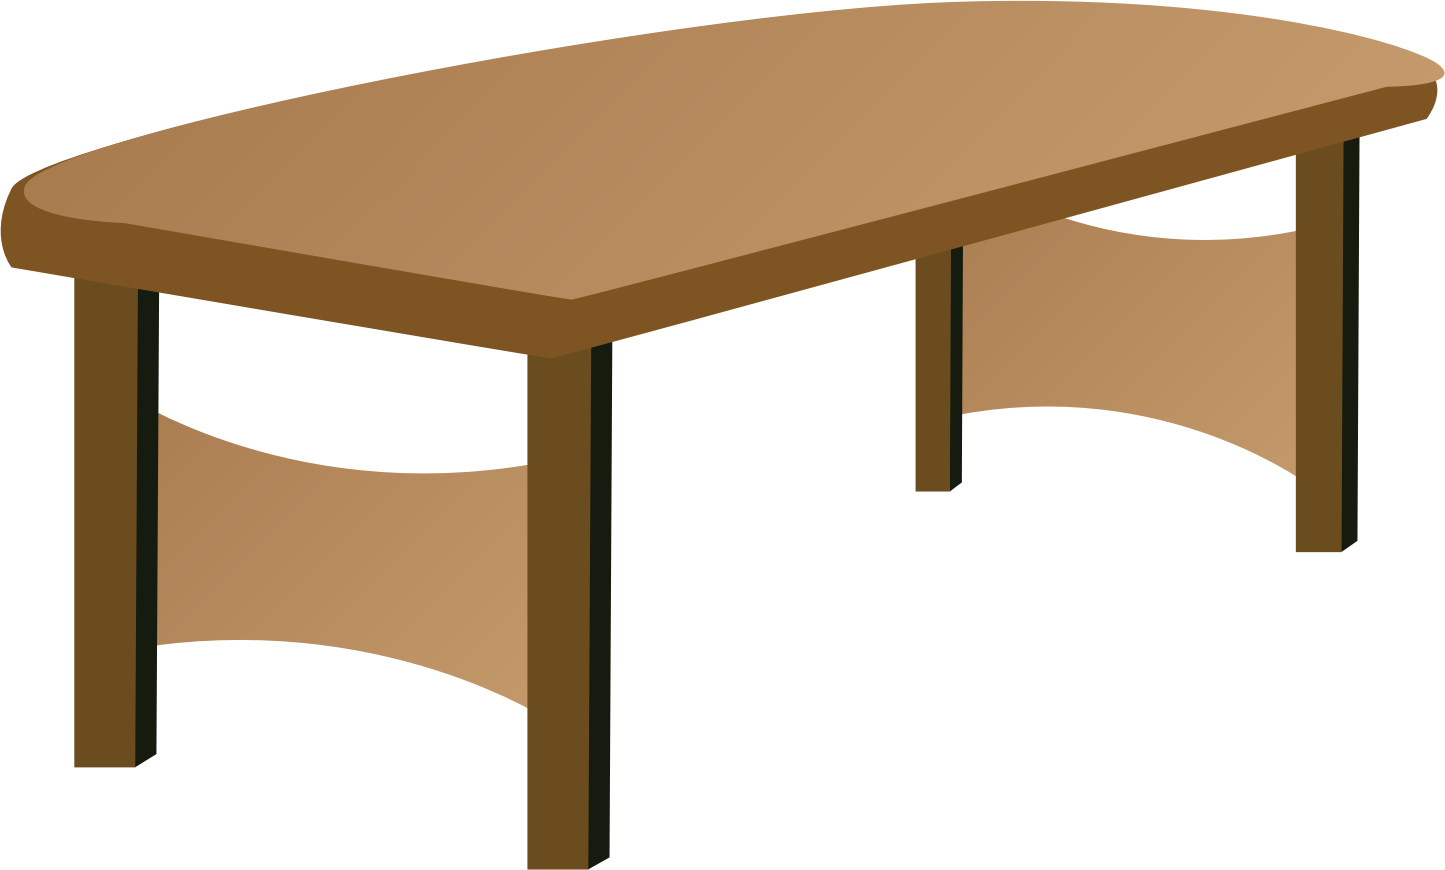 green table clipart - photo #40